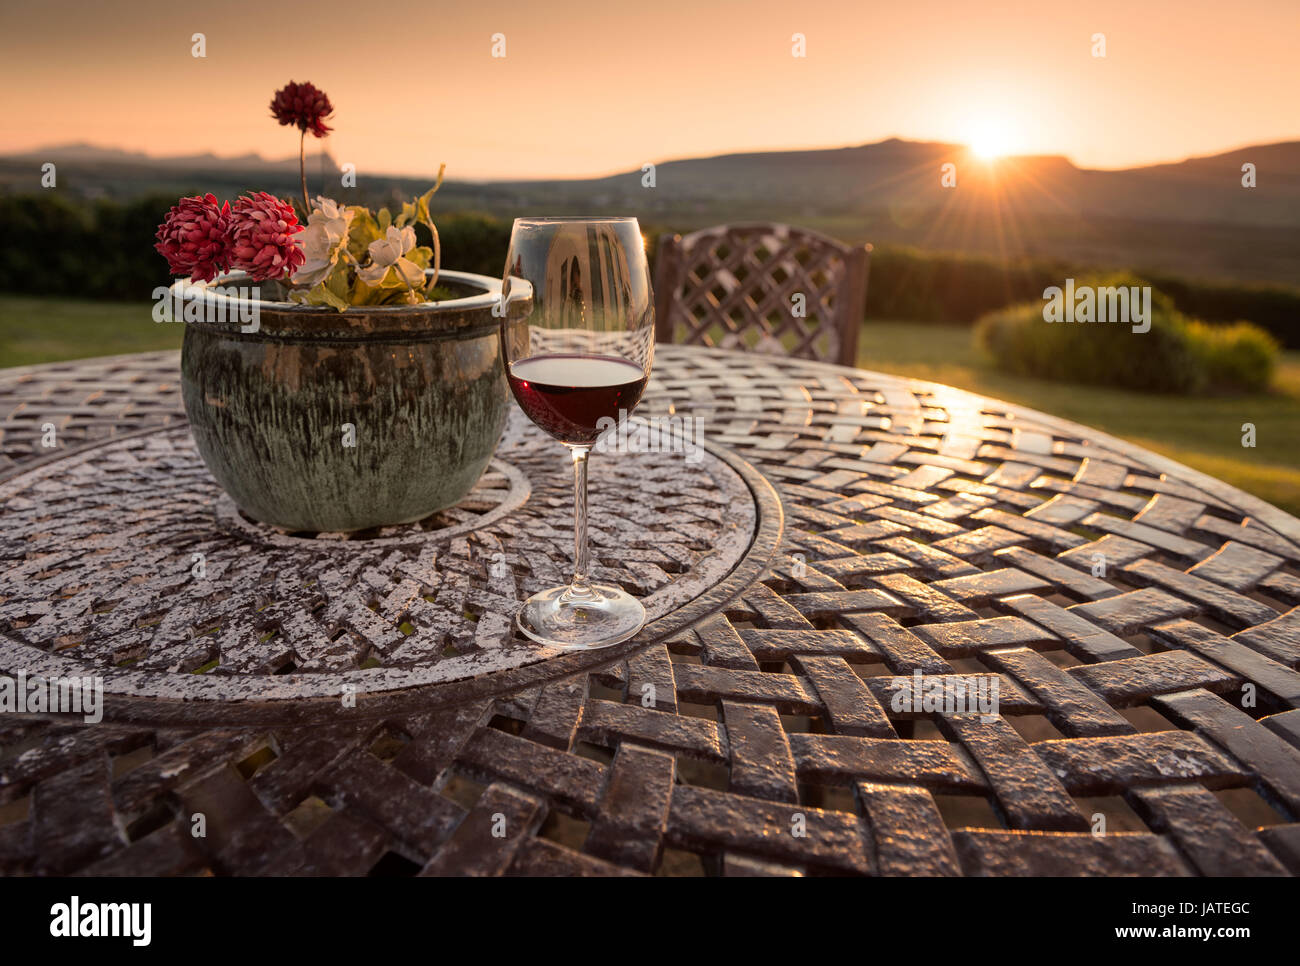 Dingle, Ireland - Relaxing glass of red wine catching the sunset light Stock Photo